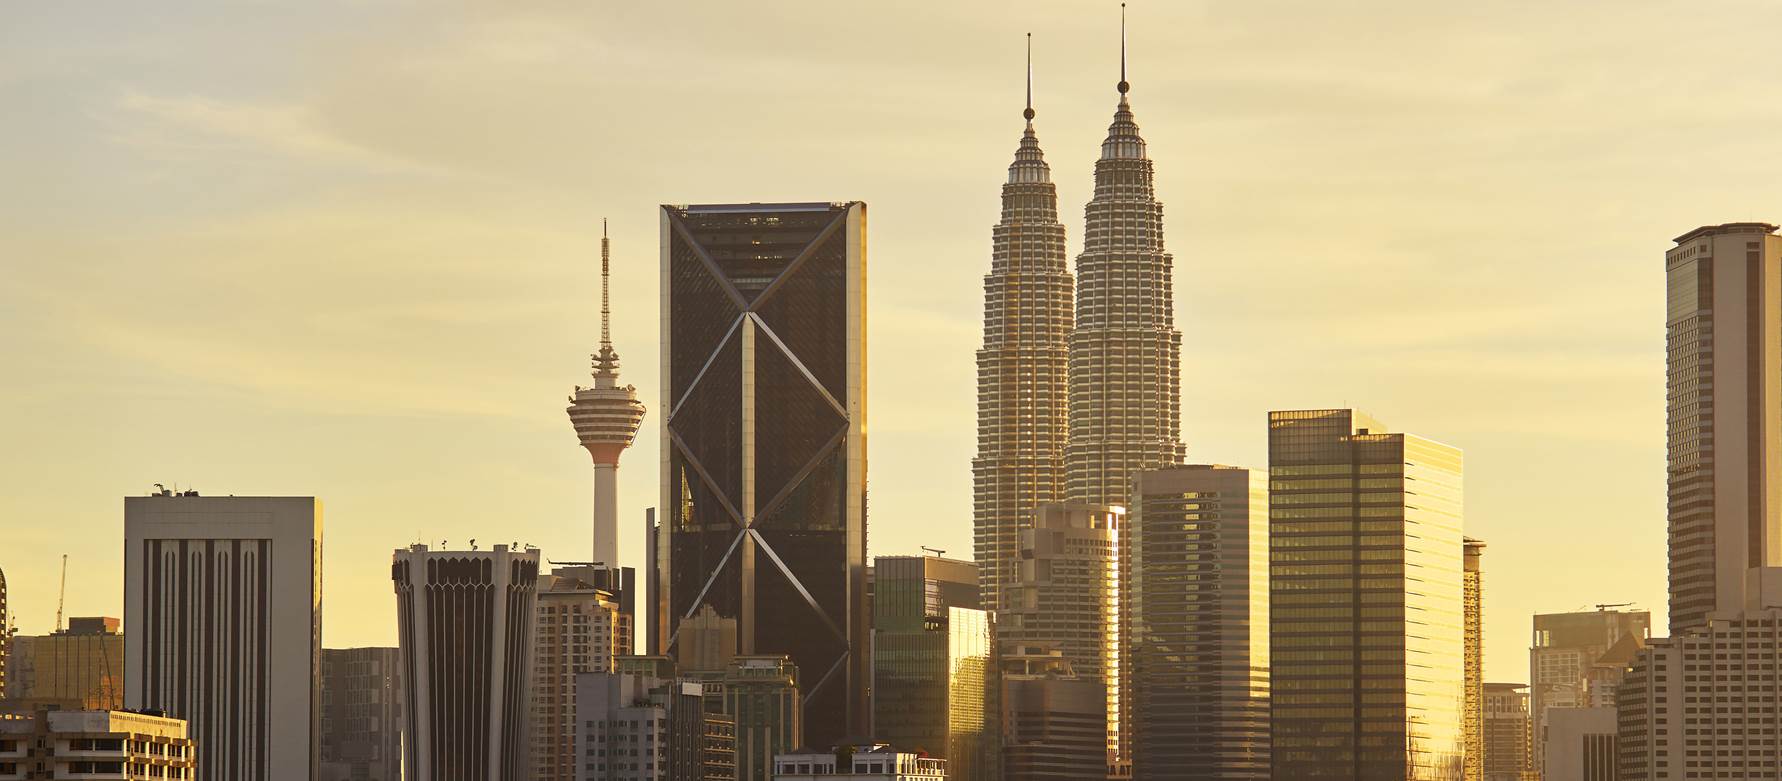 Crowe Malaysia has 13 offices nationwide